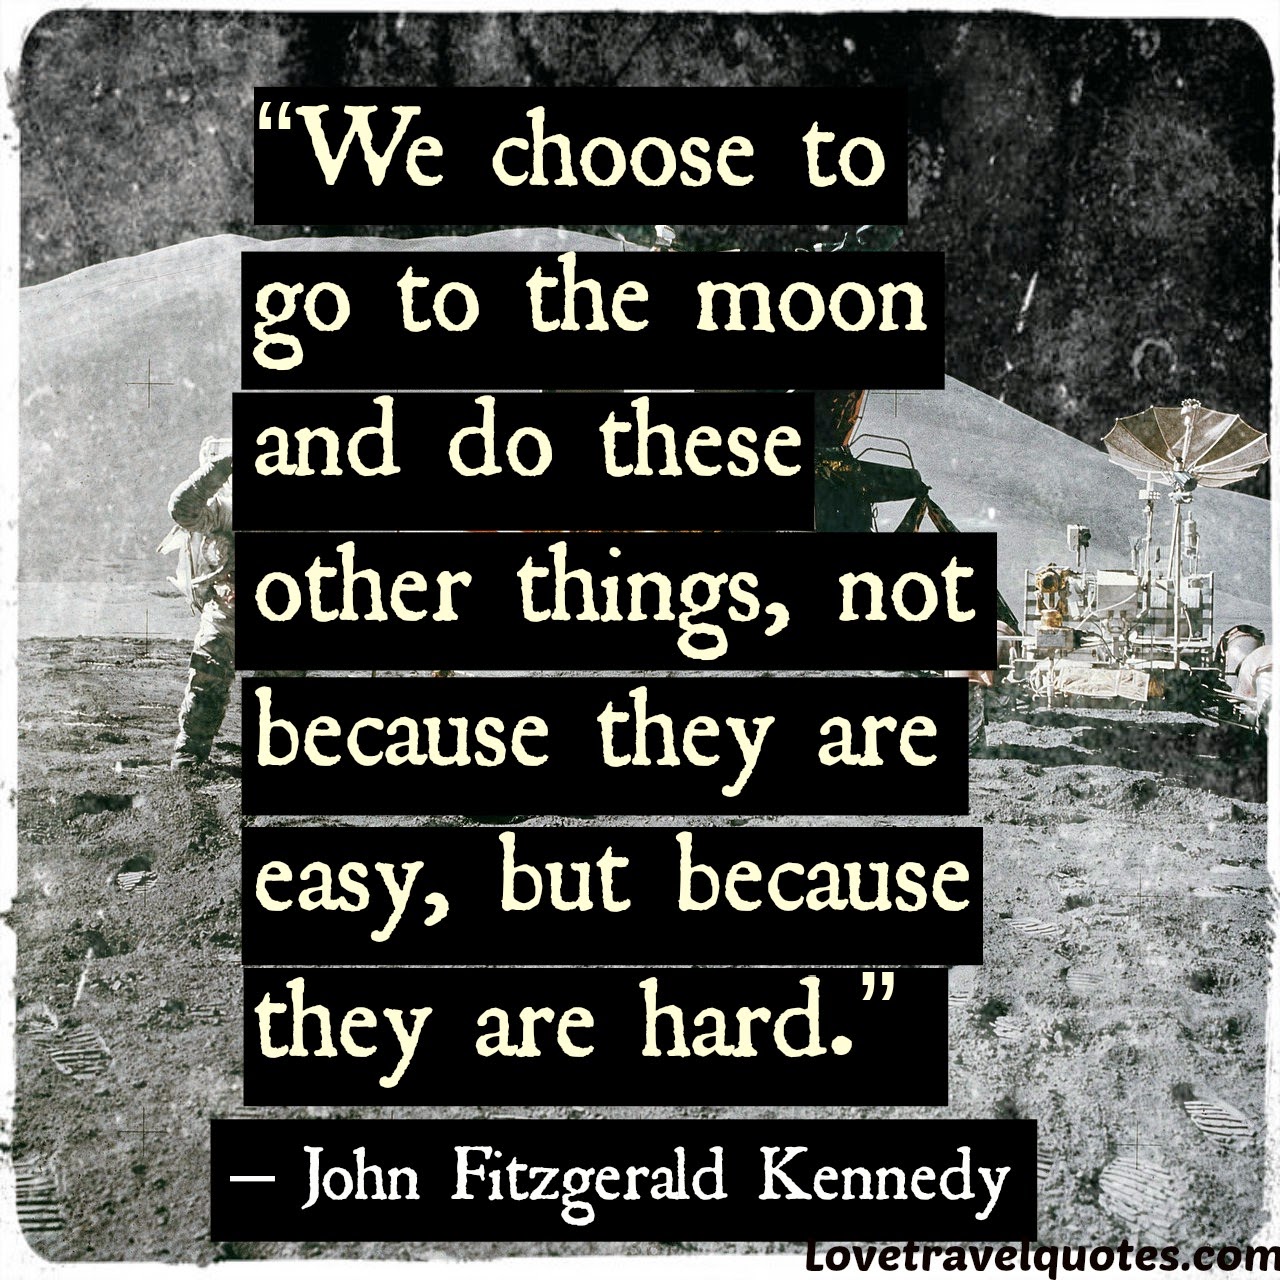 we choose to go to the moon and do these other things